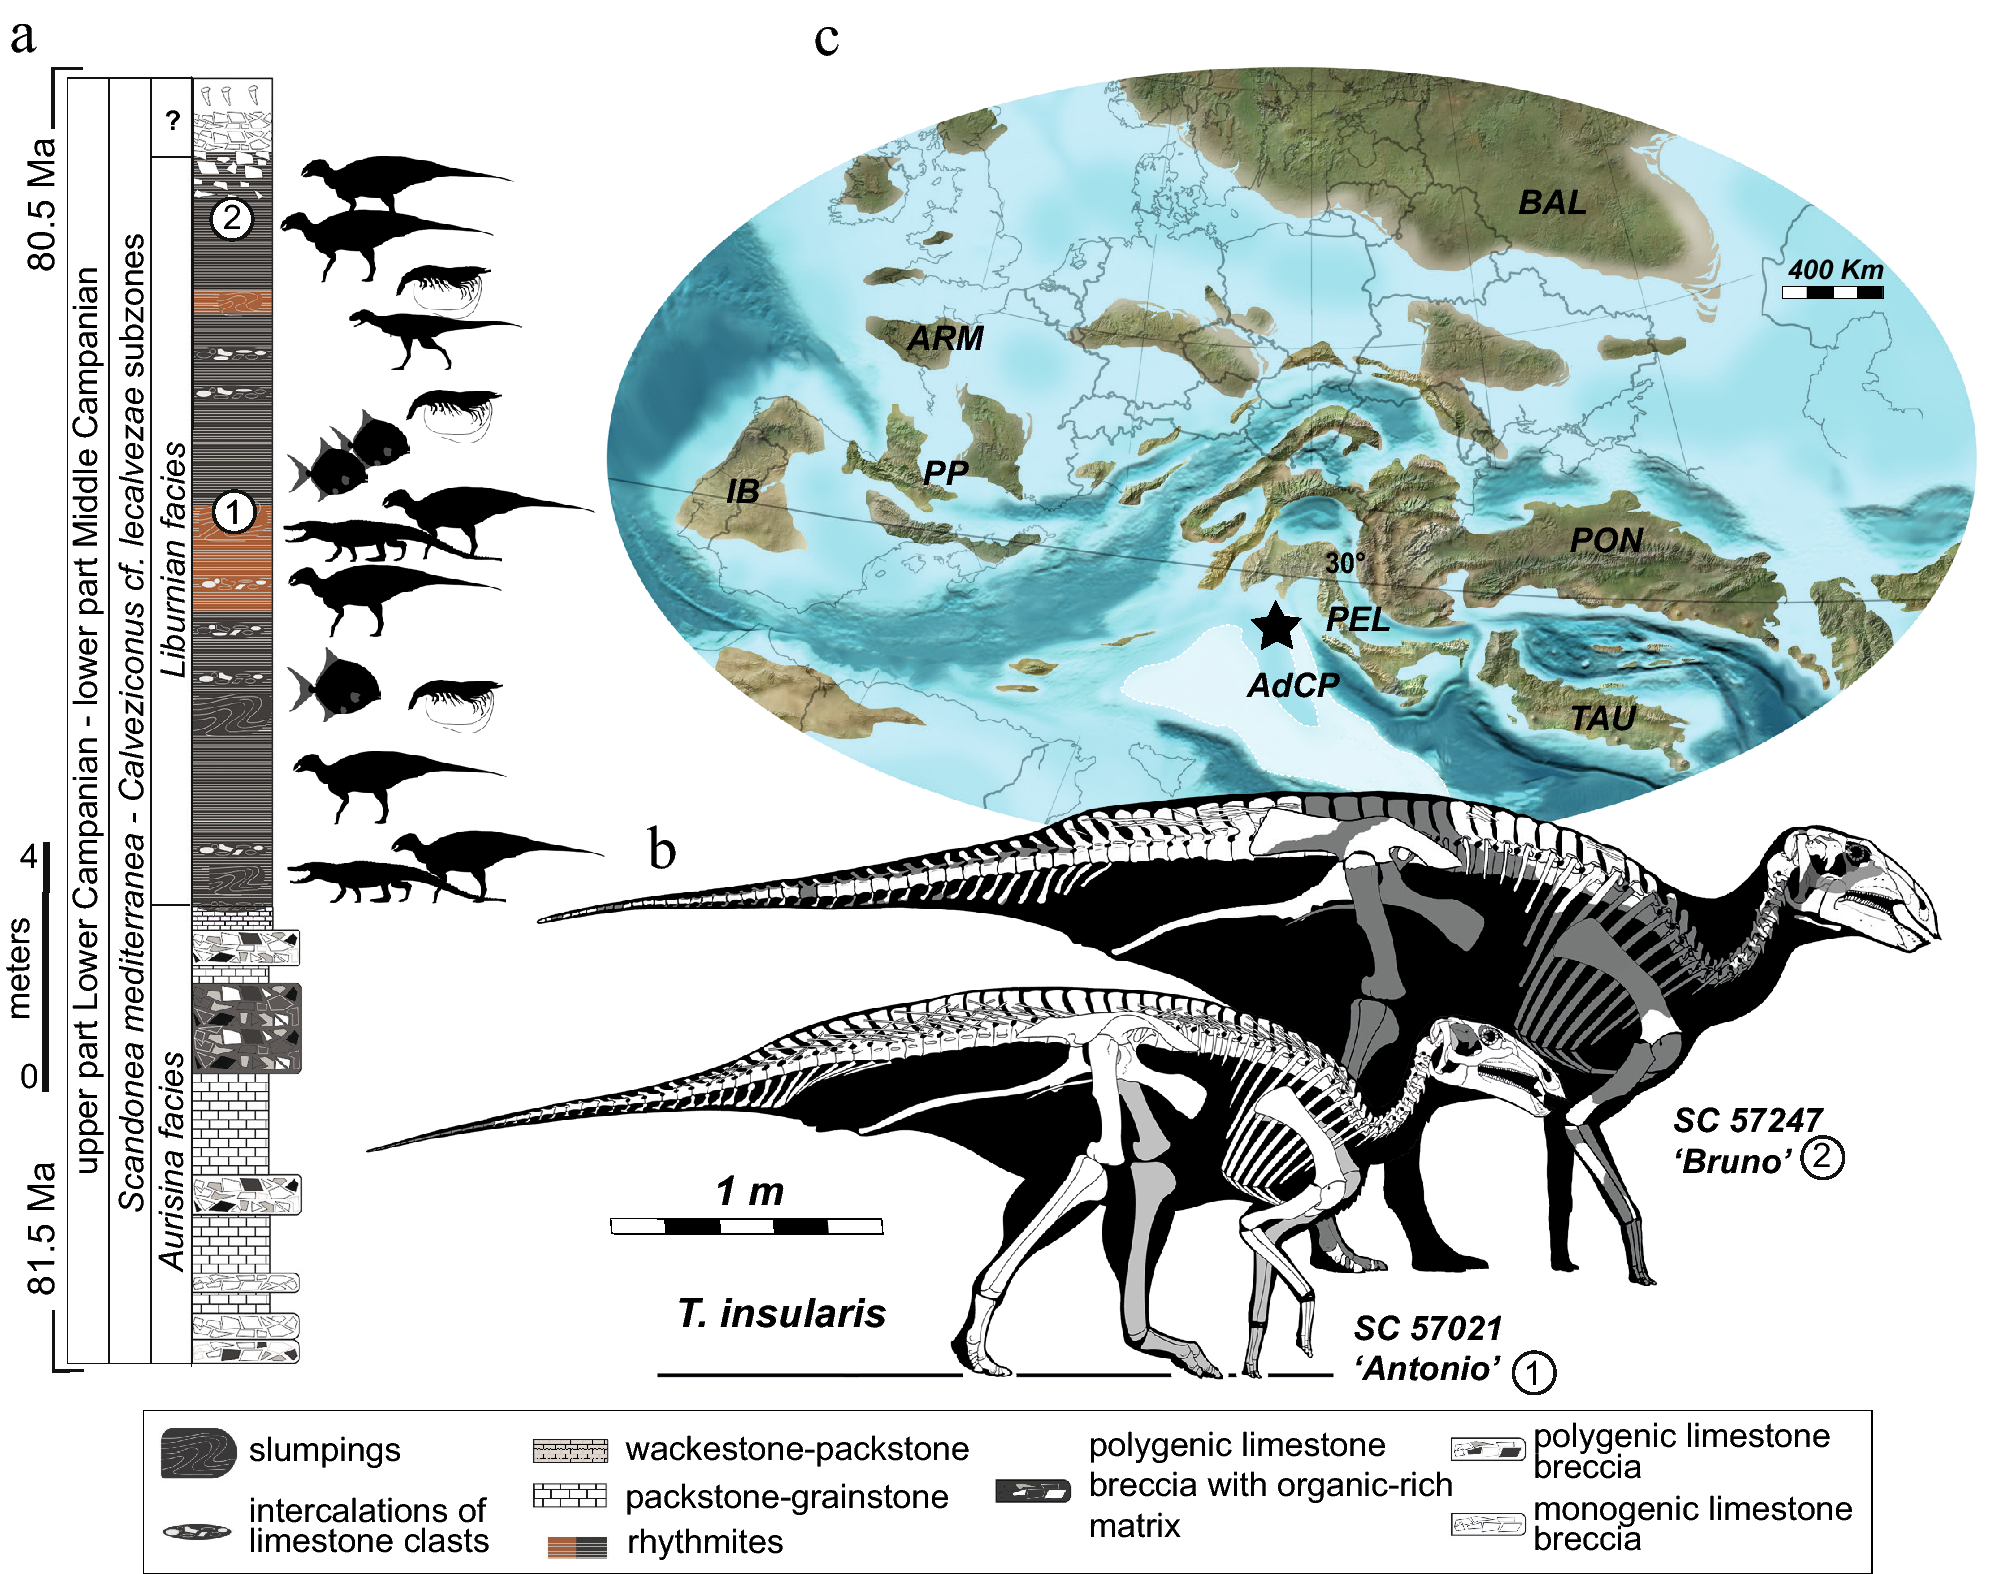 An Italian dinosaur Lagerstätte reveals the tempo and mode of  hadrosauriform body size evolution | Scientific Reports